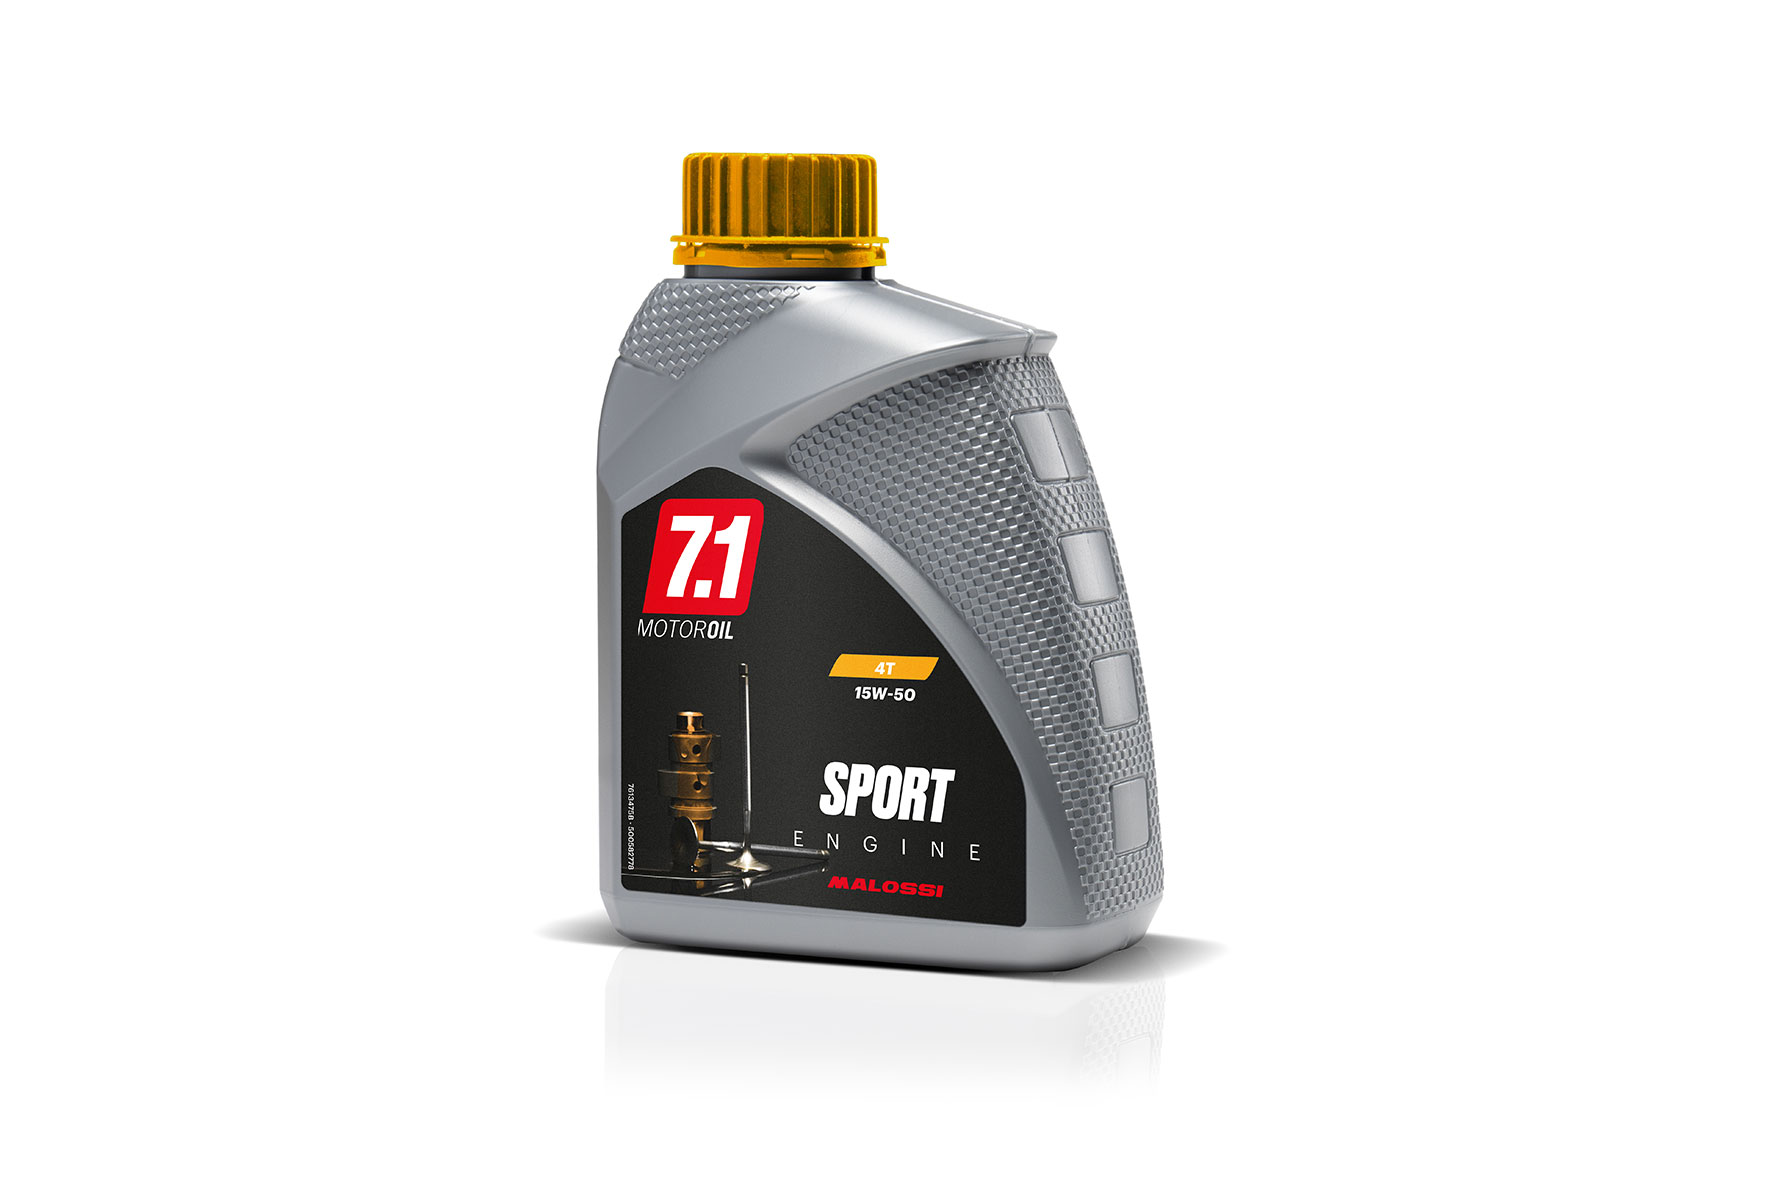 Масло т бойл. Масло 20w50 Jaso ma2. Jaso ma2 масло 10w50 r4000rs. G-Motion 4t 5w-40. 7.1 Malossi Motor Oil.